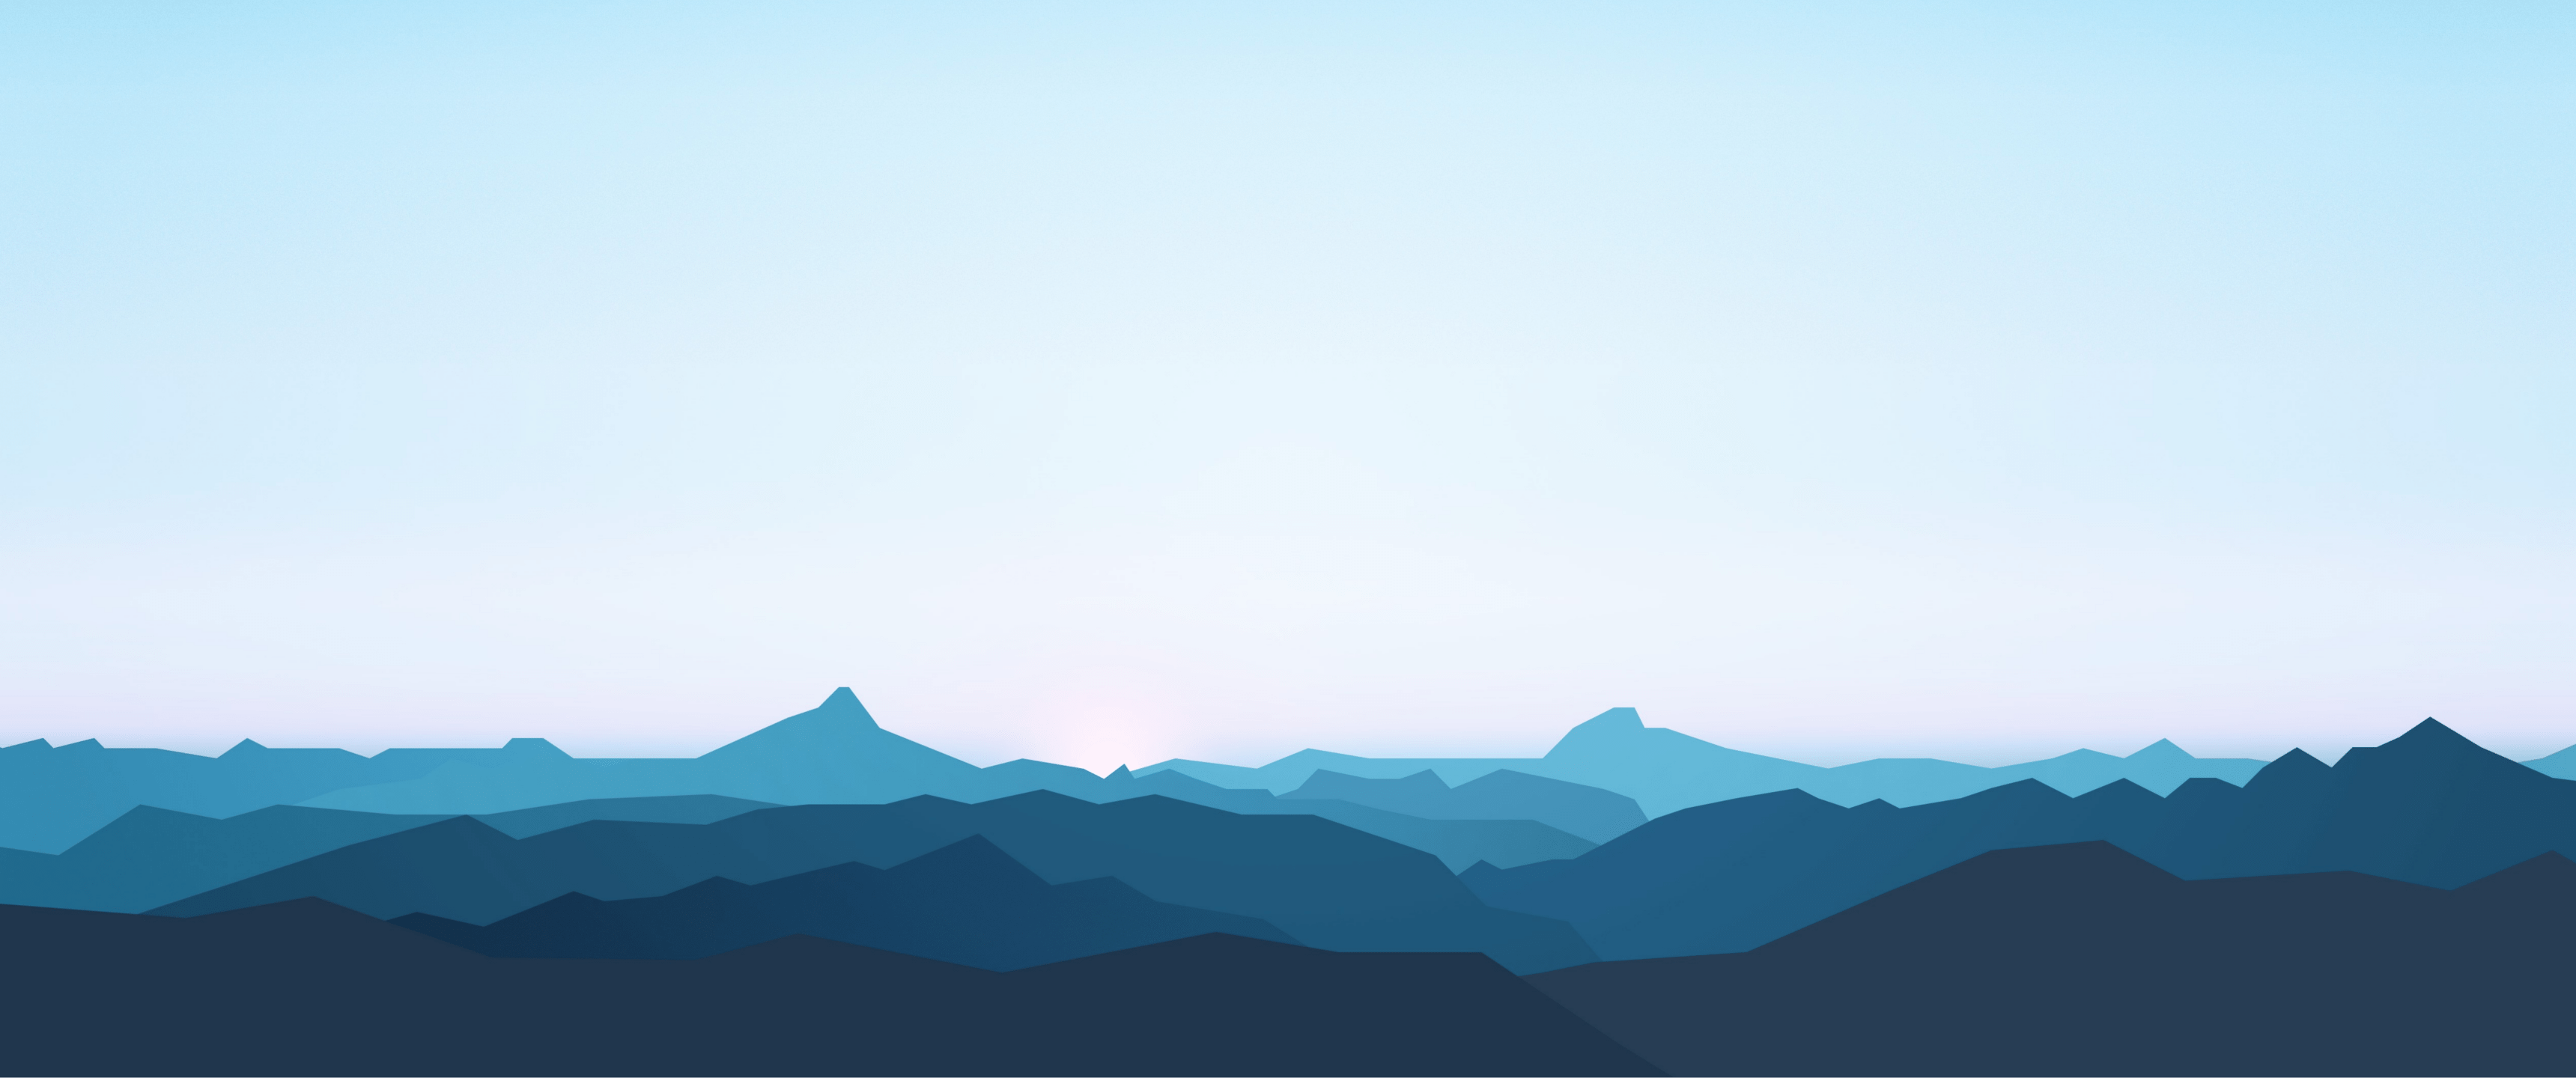 A landscape with mountains and blue sky - 3440x1440